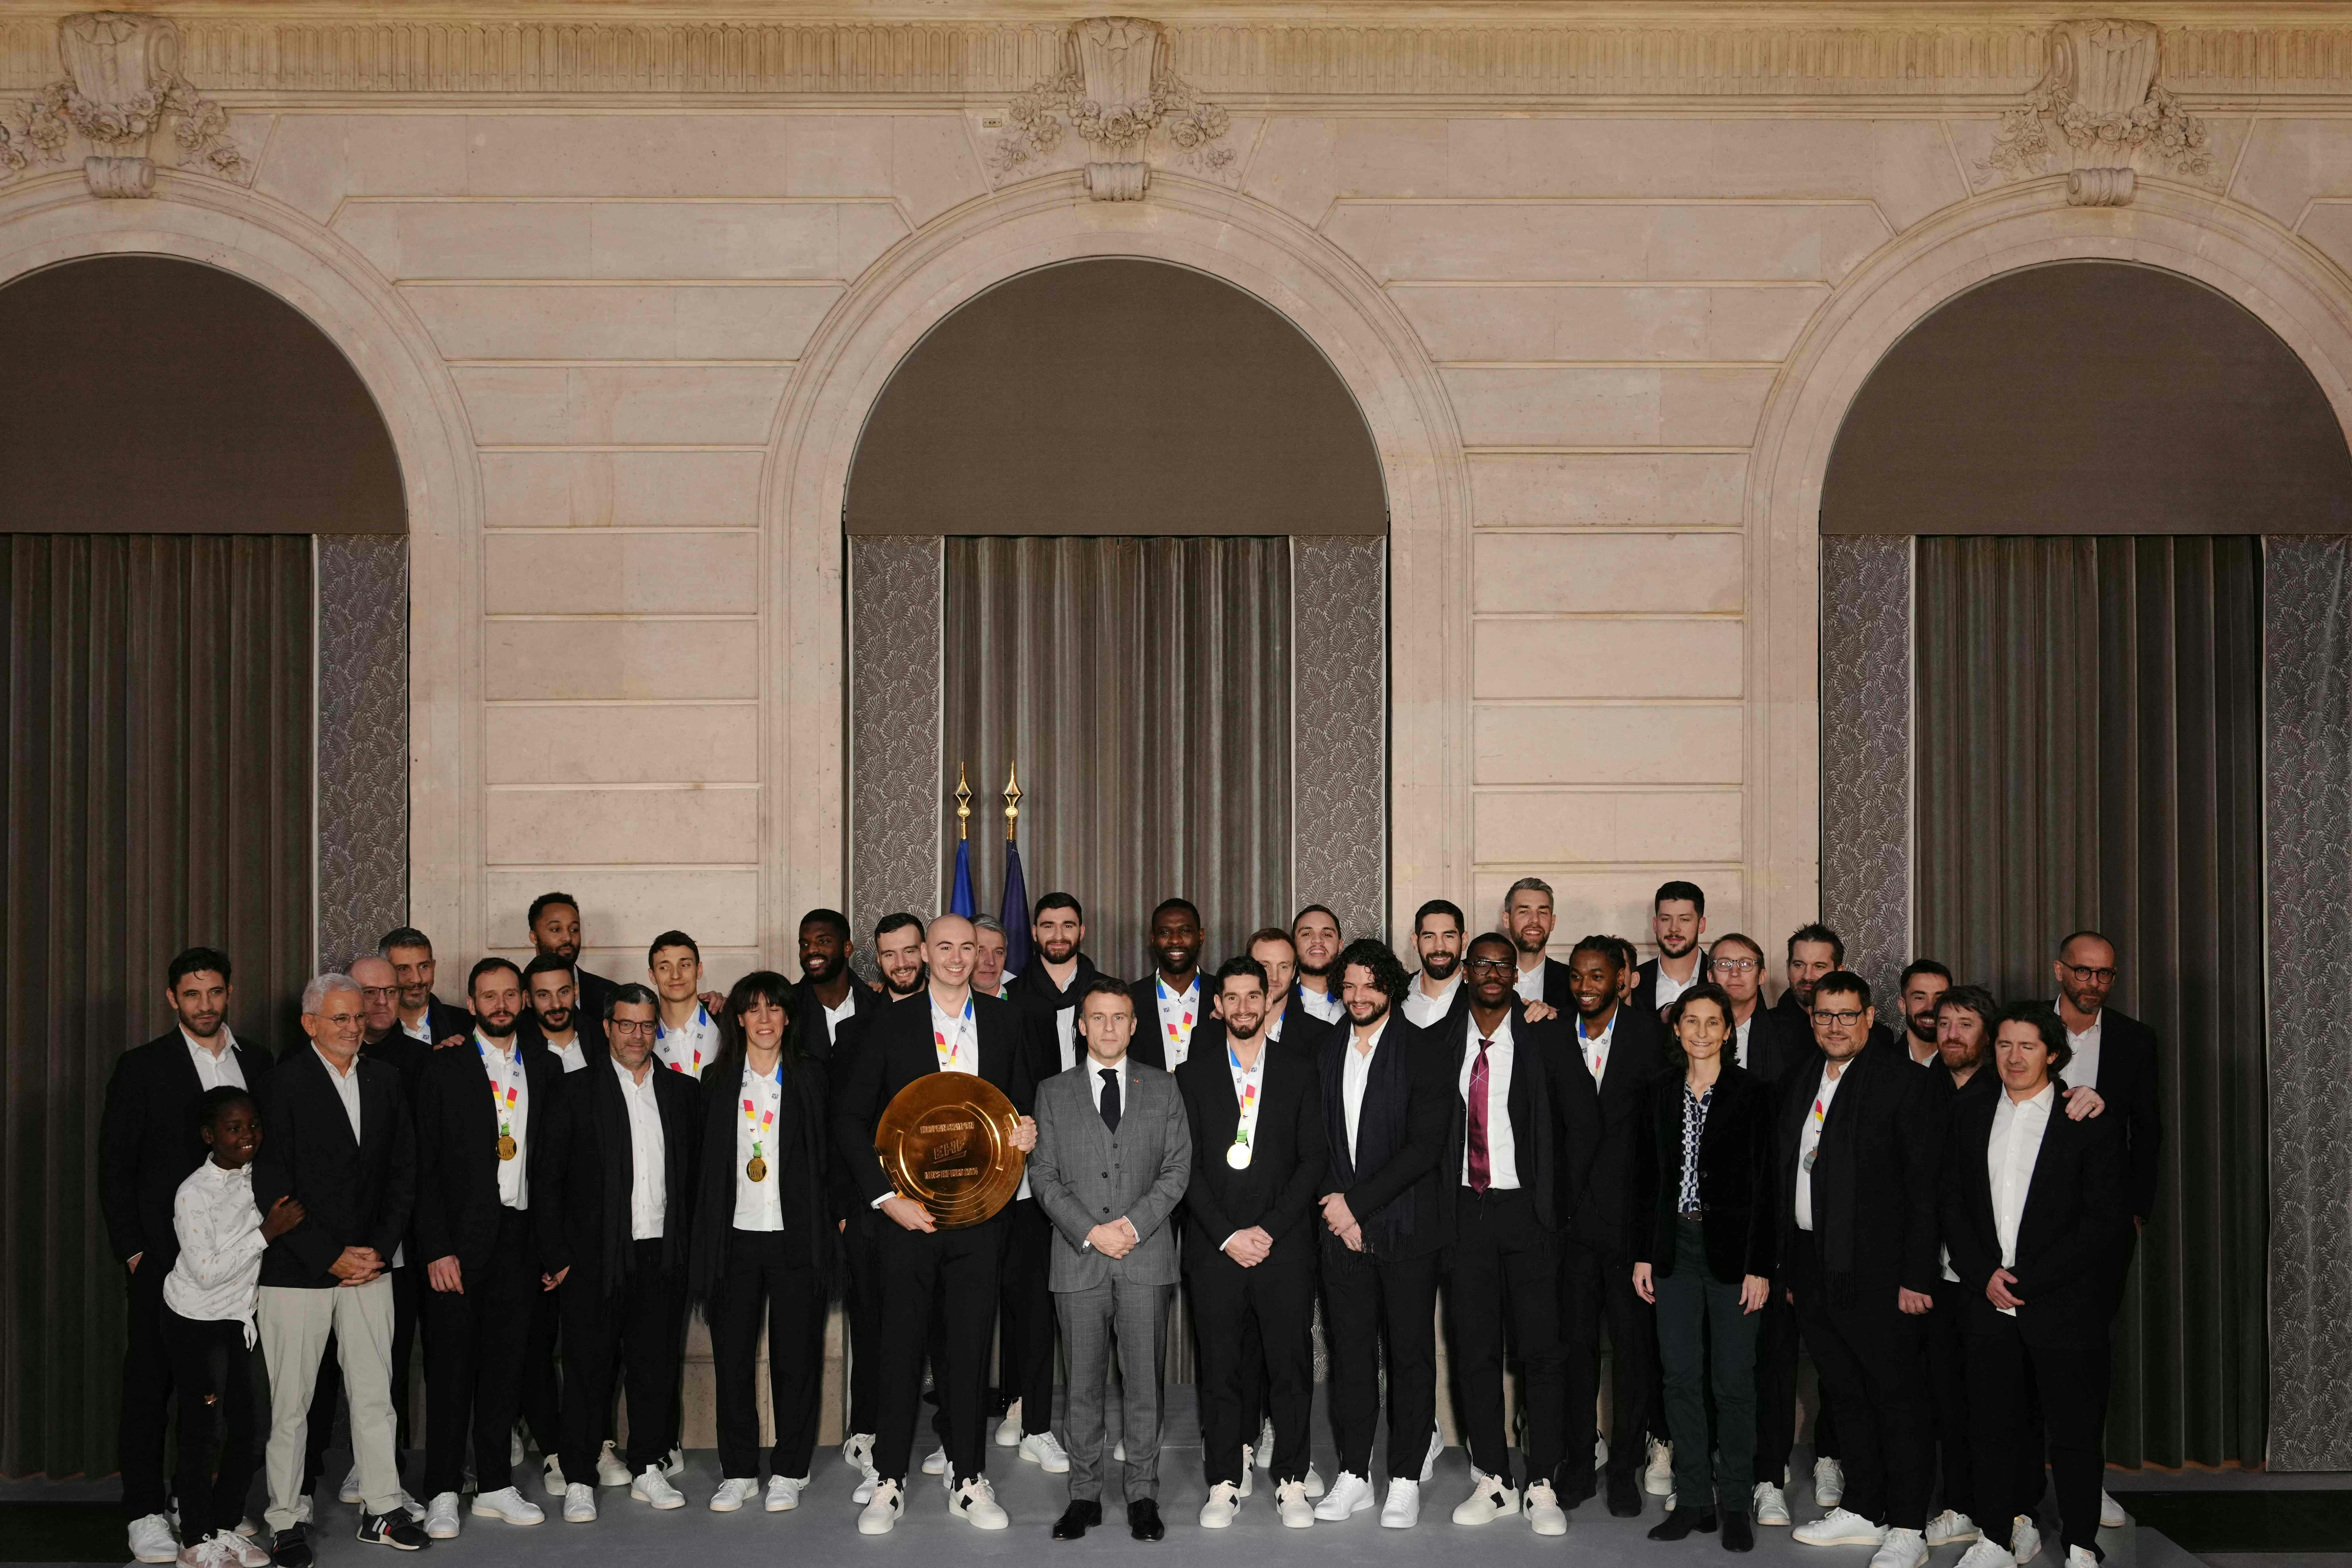 French President Emmanuel Macron (C) poses with France's handball team at the Elysee Palace in Paris on January 29, 2024 after their victory over Denmark to win the Men's EURO 2024 EHF Handball European Championship. (Photo by Dimitar DILKOFF / AFP)